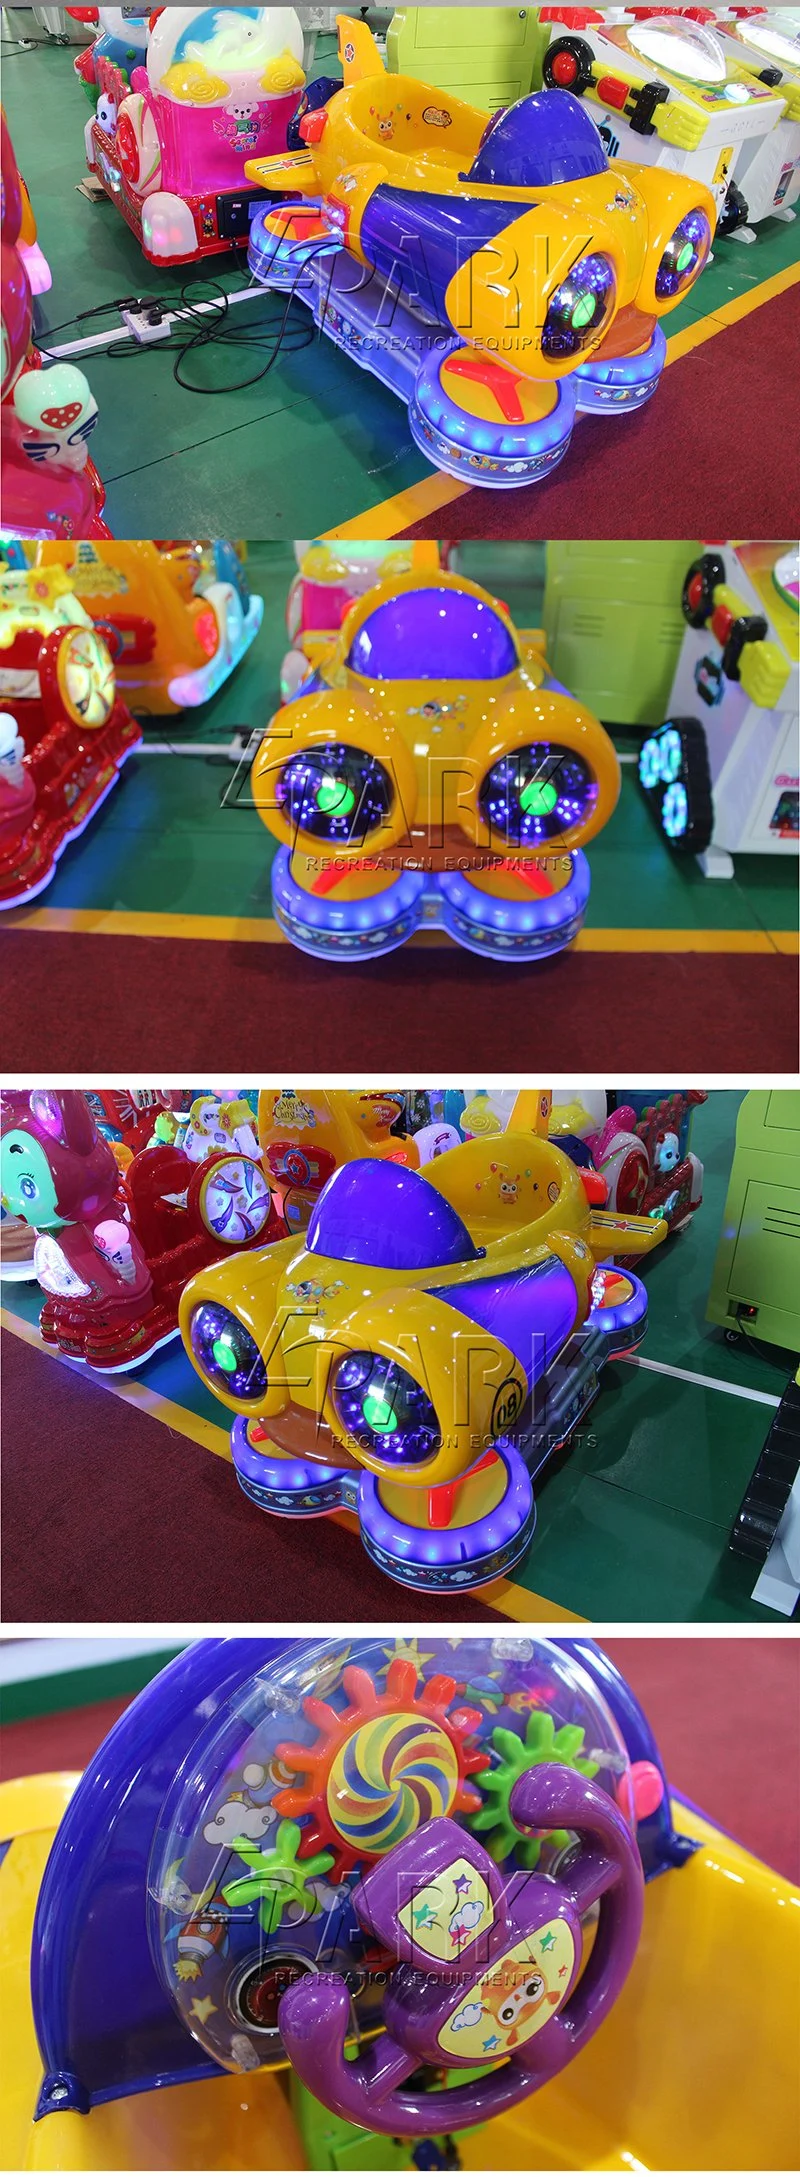 New Spaceship Kiddie Rides Machine Kids Video Rides on Swing Car for The Shopping Mall